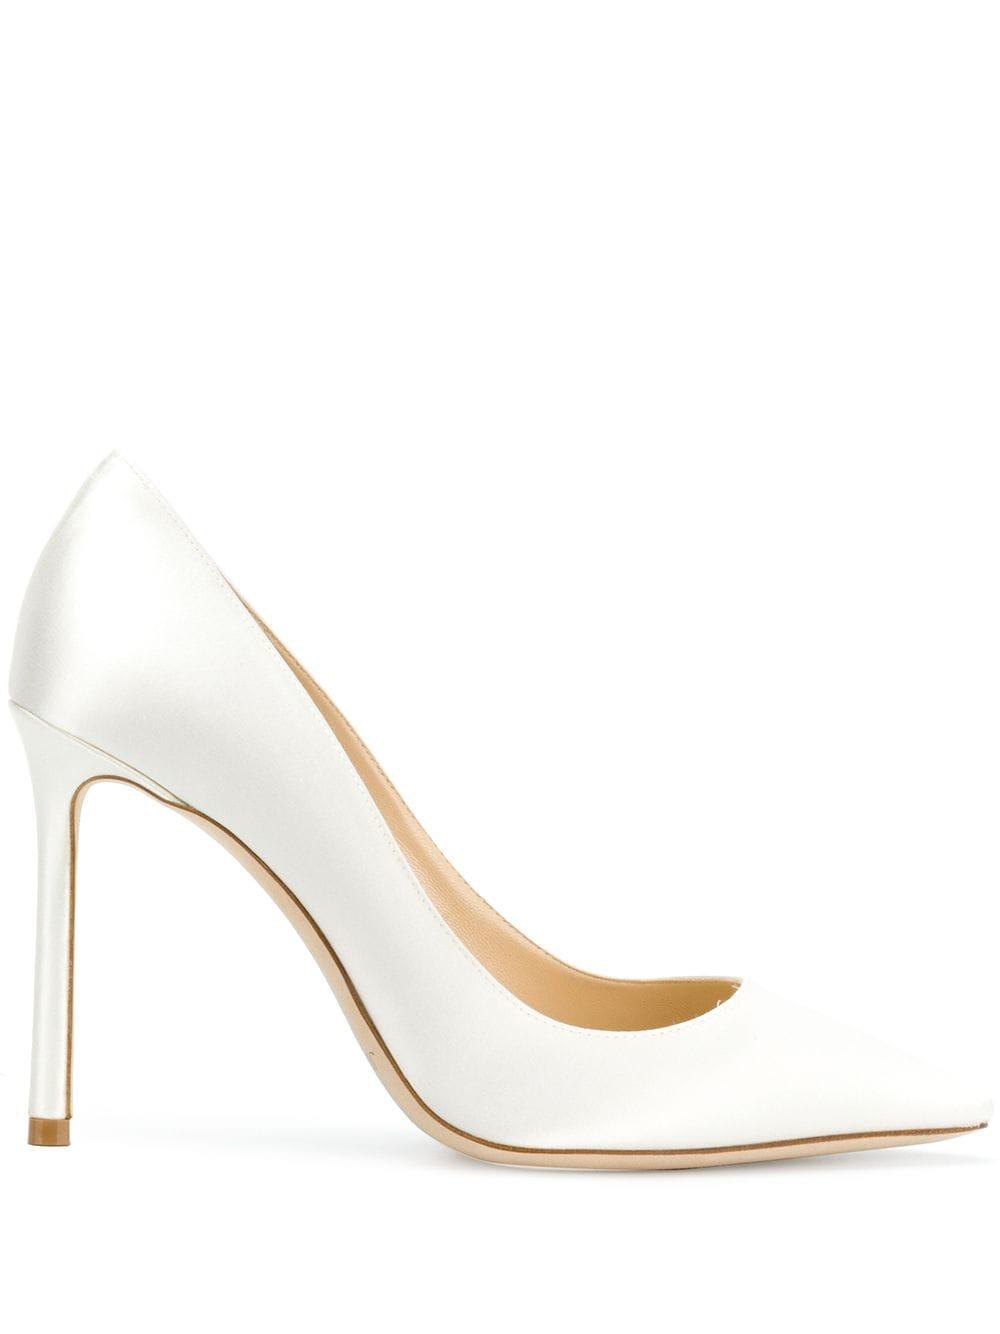 Jimmy Choo Leather Romy 100 Pumps in Platinum Ice (White 